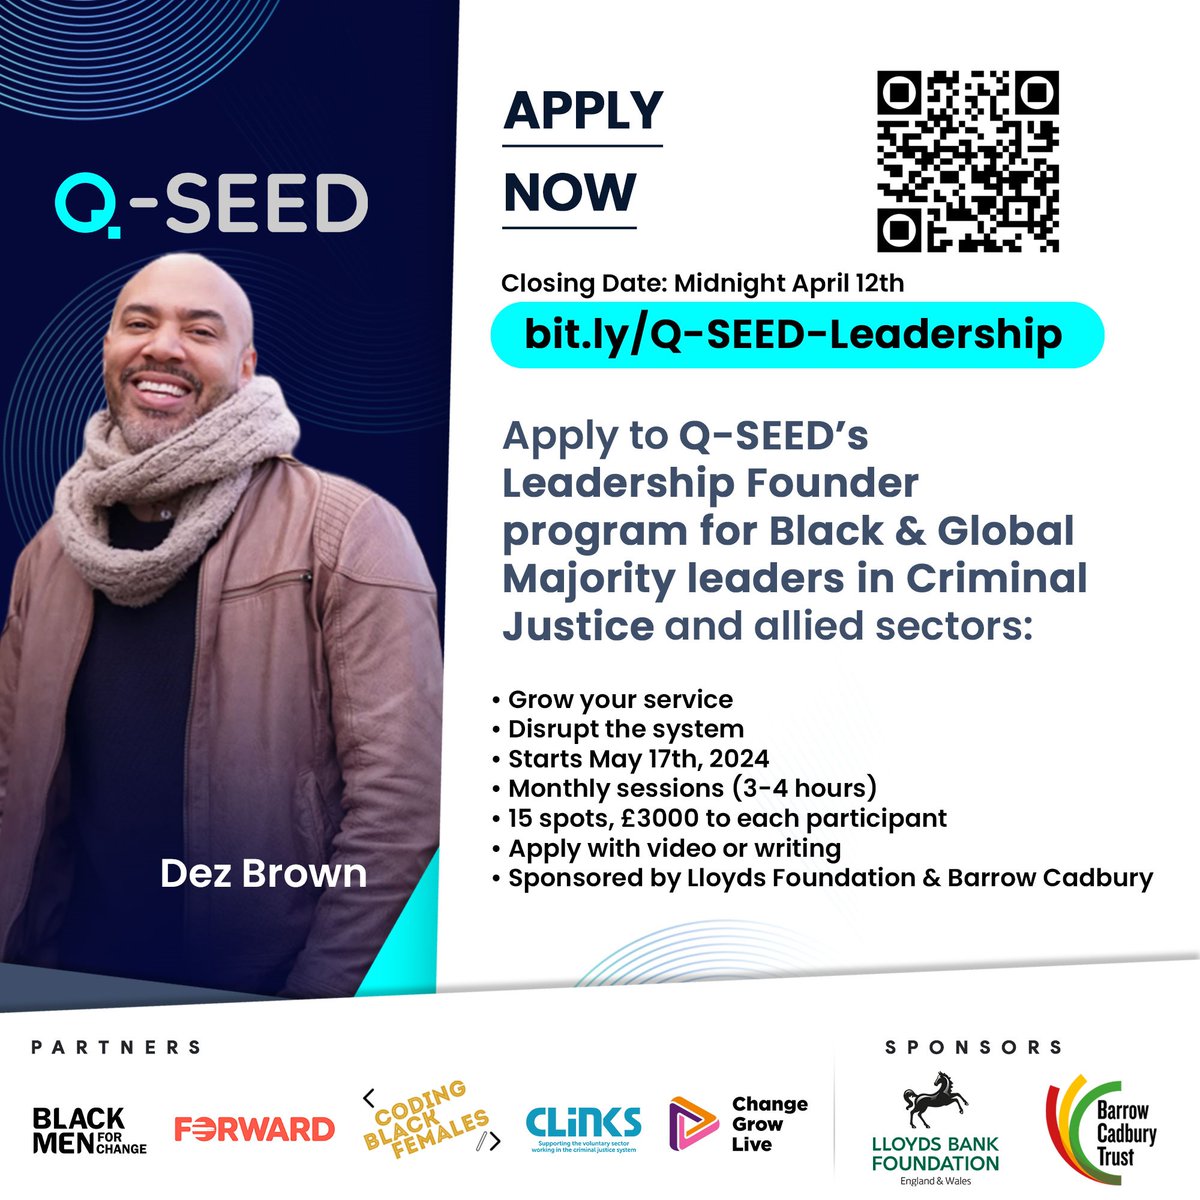 Don't miss this opportunity incredible for Black and Global Majority leads to grow services and work alongside other CJS leaders. Get your applications in for Q-SEED's leadership program before midnight Friday🕛 👇Click the link below 👇 coreplan.wispform.com/8fd33ab3